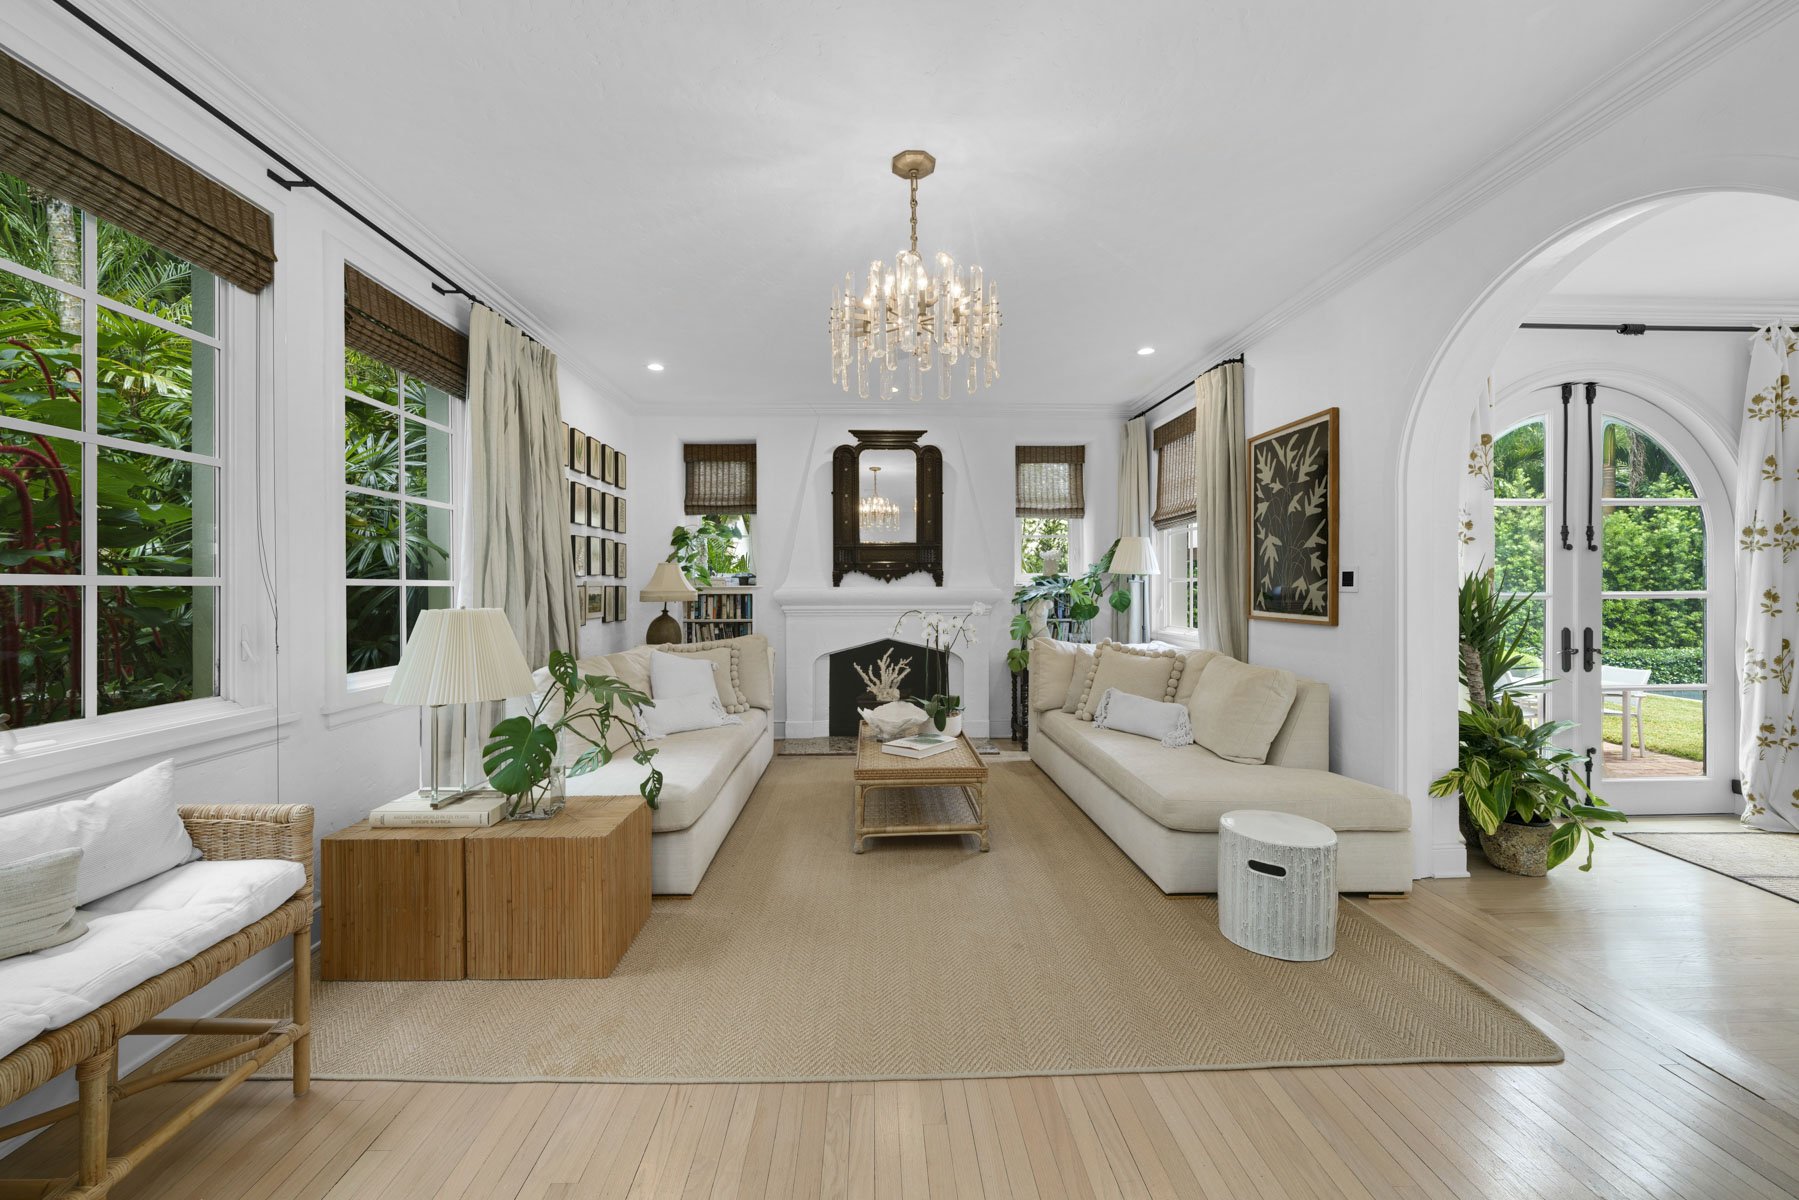 Actor And Producer Christian Slater Sells Classic Coconut Grove Home For $4.258 Million 9.jpg